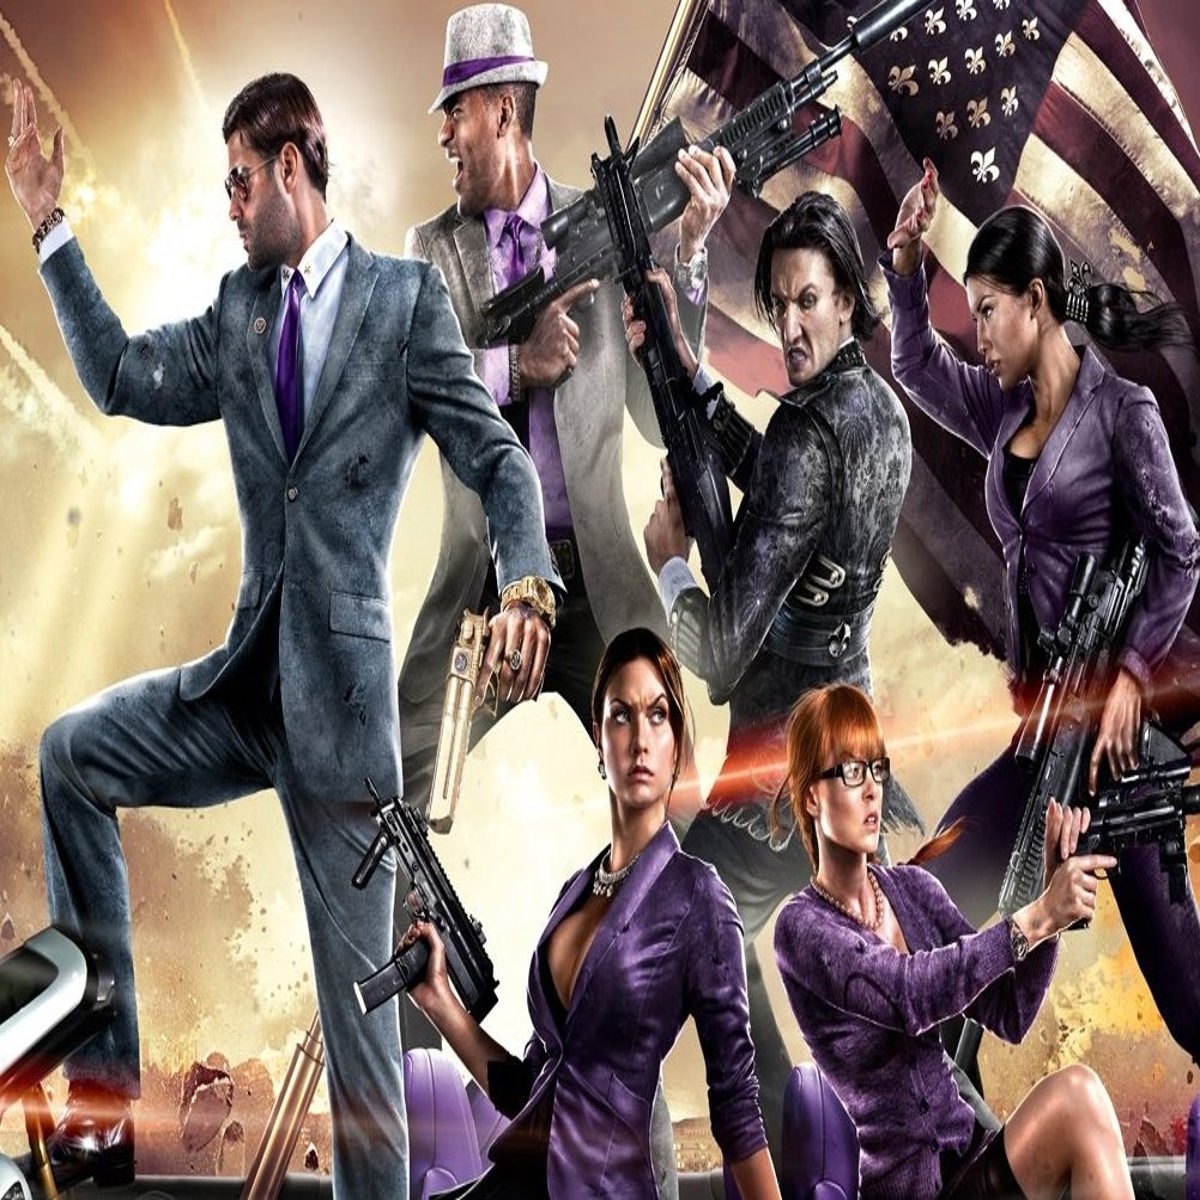  Saints Row The Third - Remastered - PlayStation 4 Remastered  Edition : Plaion Inc, Nordic Games: Video Games